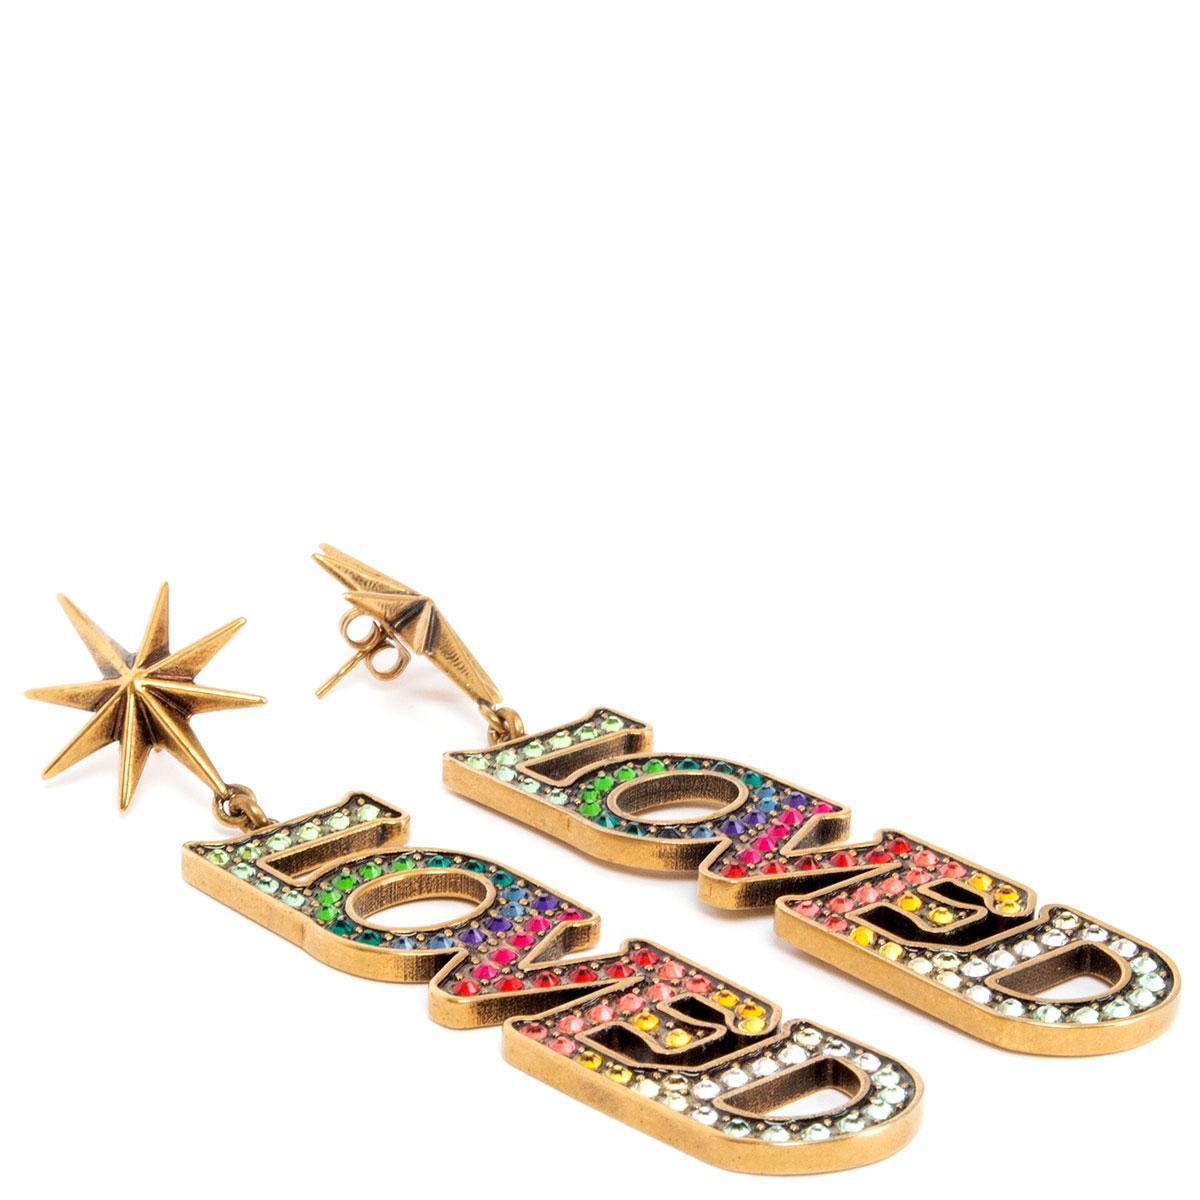 Gucci Loved drop earrings embellished with multicolour crystals and antique gold-tone hardware. Have been worn and are in excellent condition. 

Width 2cm (0.8in)
Length 8.5cm (3.3in)
Hardware Antique Gold-Tone